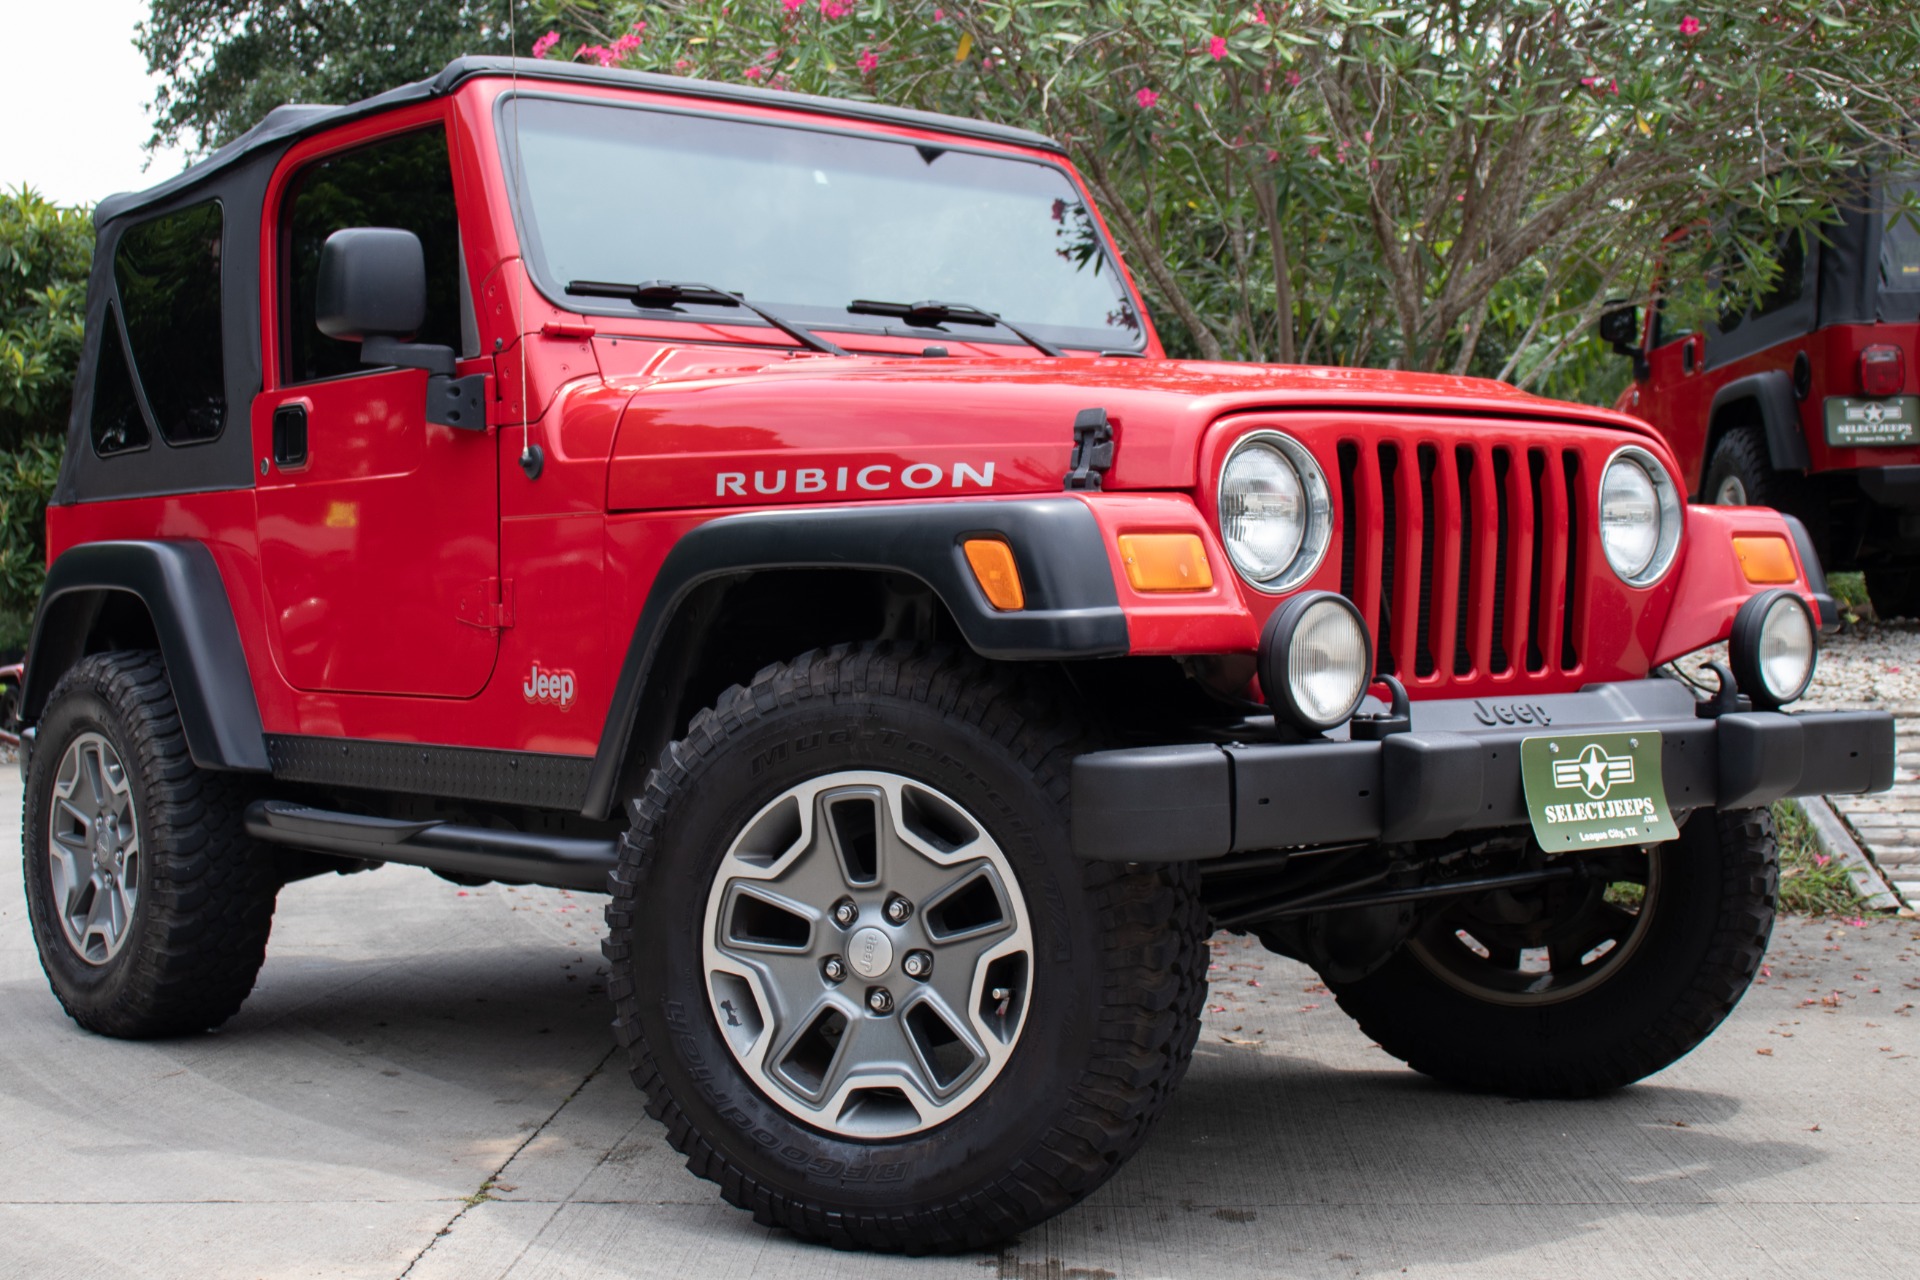 Used 2006 Jeep Wrangler Rubicon For Sale ($19,995) | Select Jeeps Inc.  Stock #768056